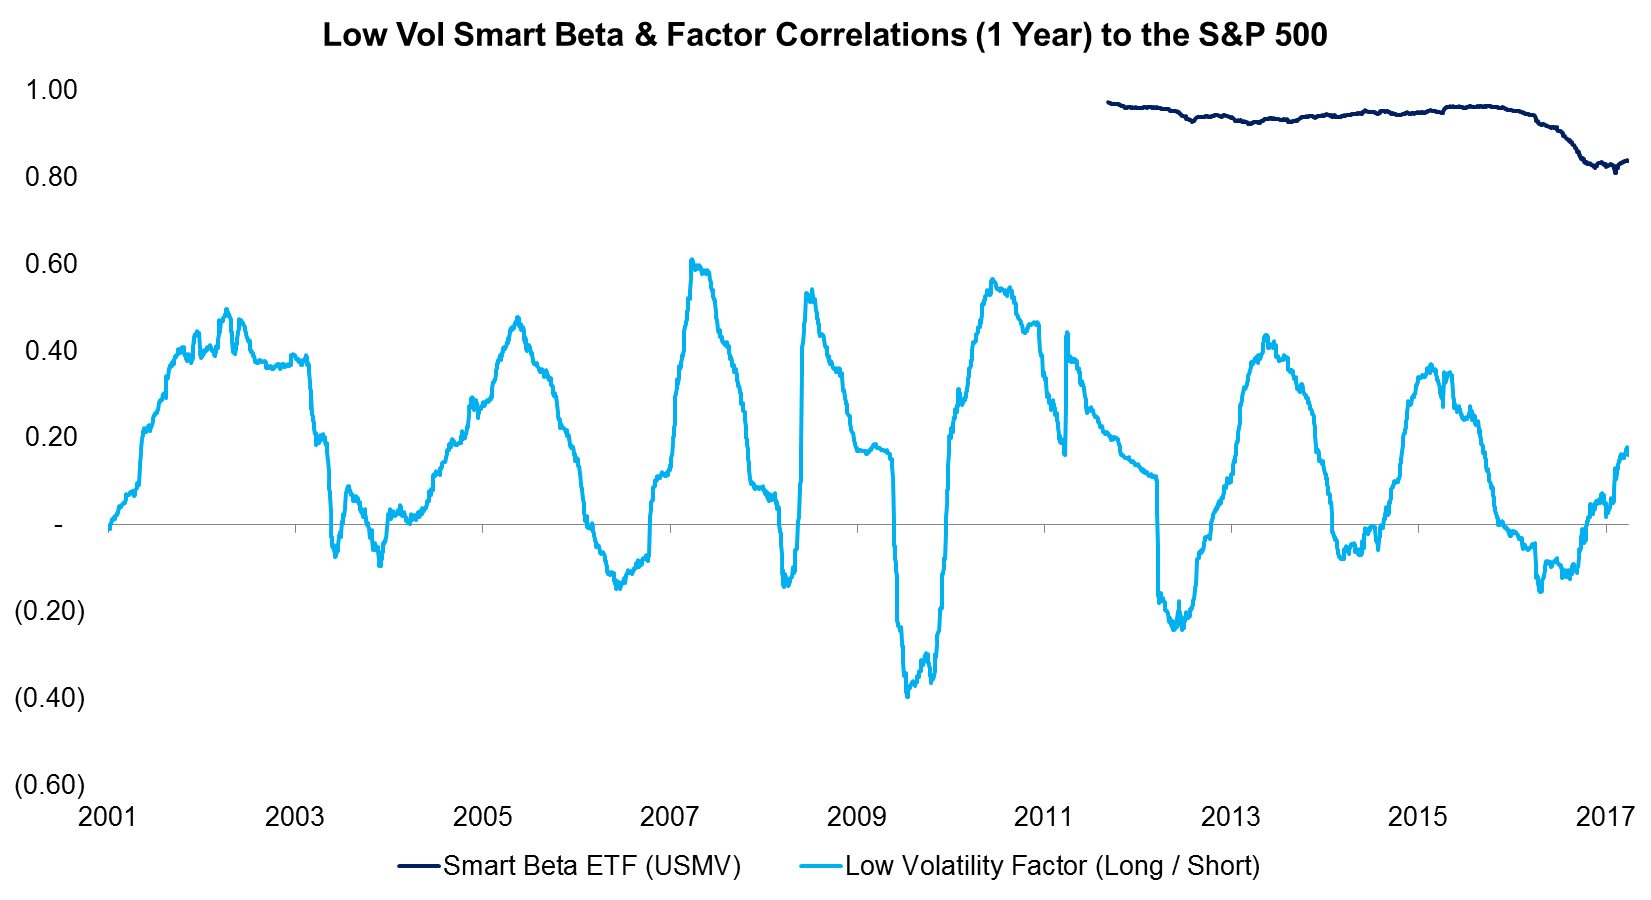 Low Vol Smart Beta & Factor Correlations (1 Year) to the S&P 500